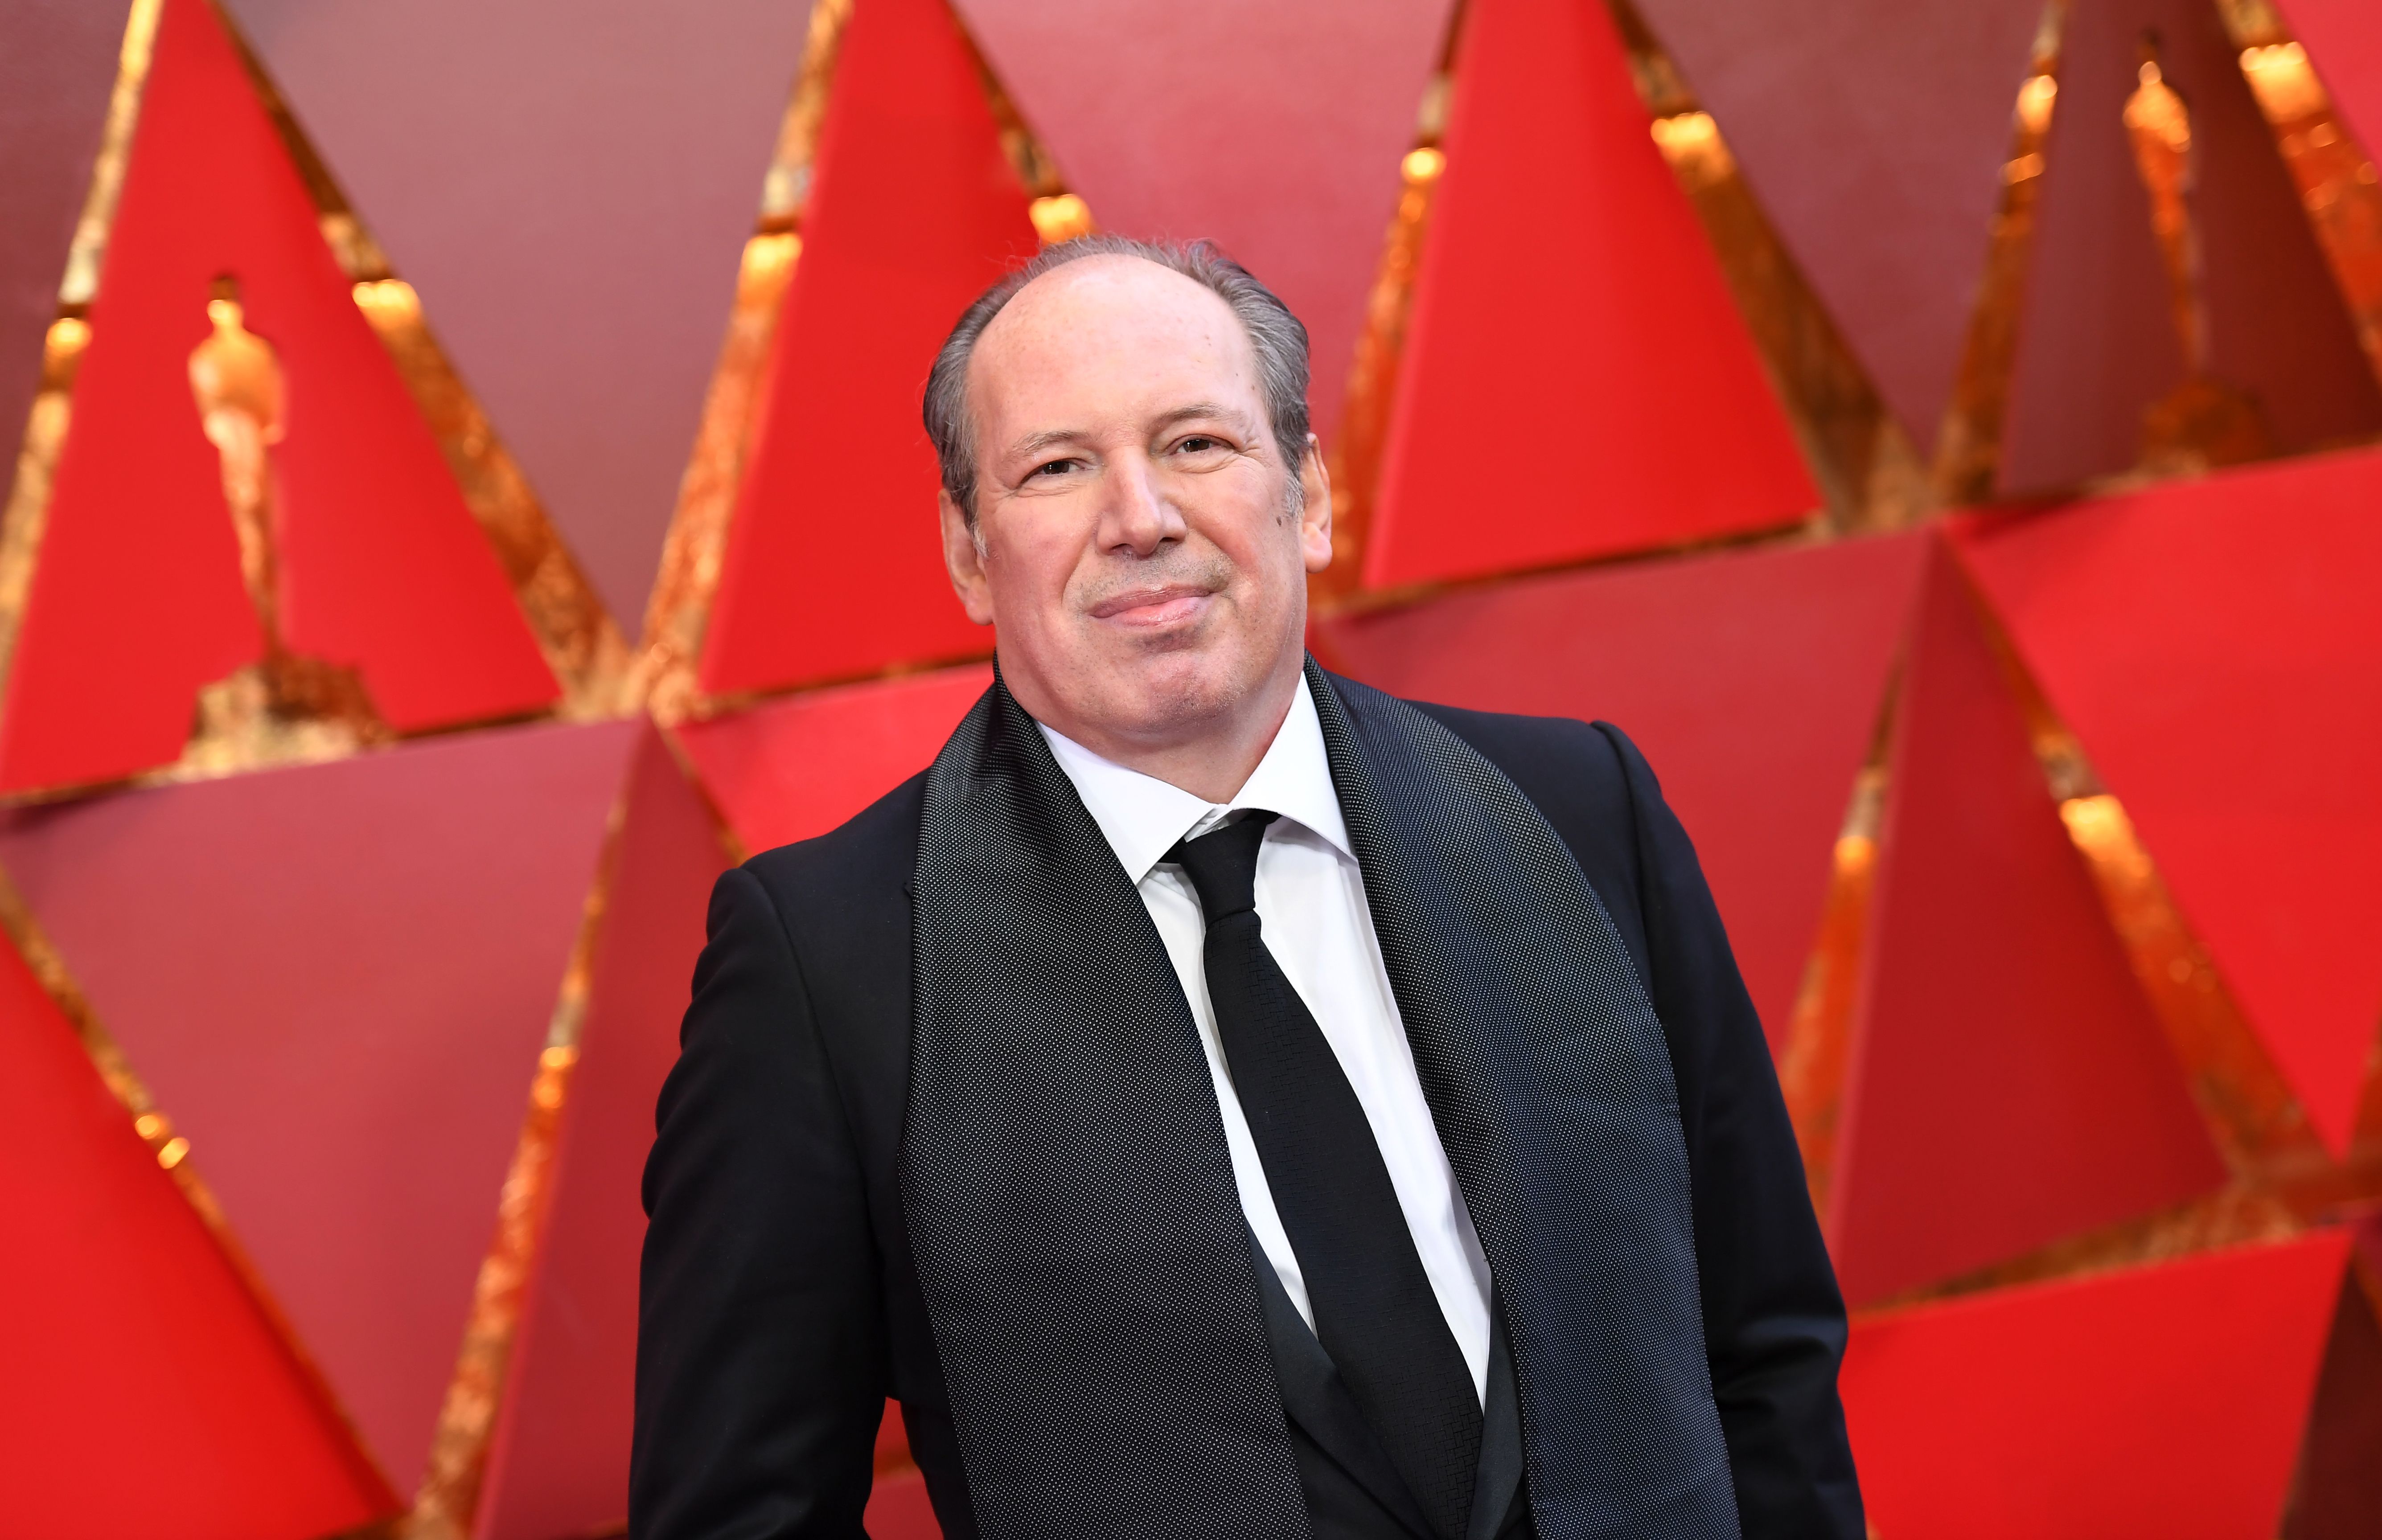 Hans Zimmer, who has composed scores for many movies, attends the 90th Academy Awards. 